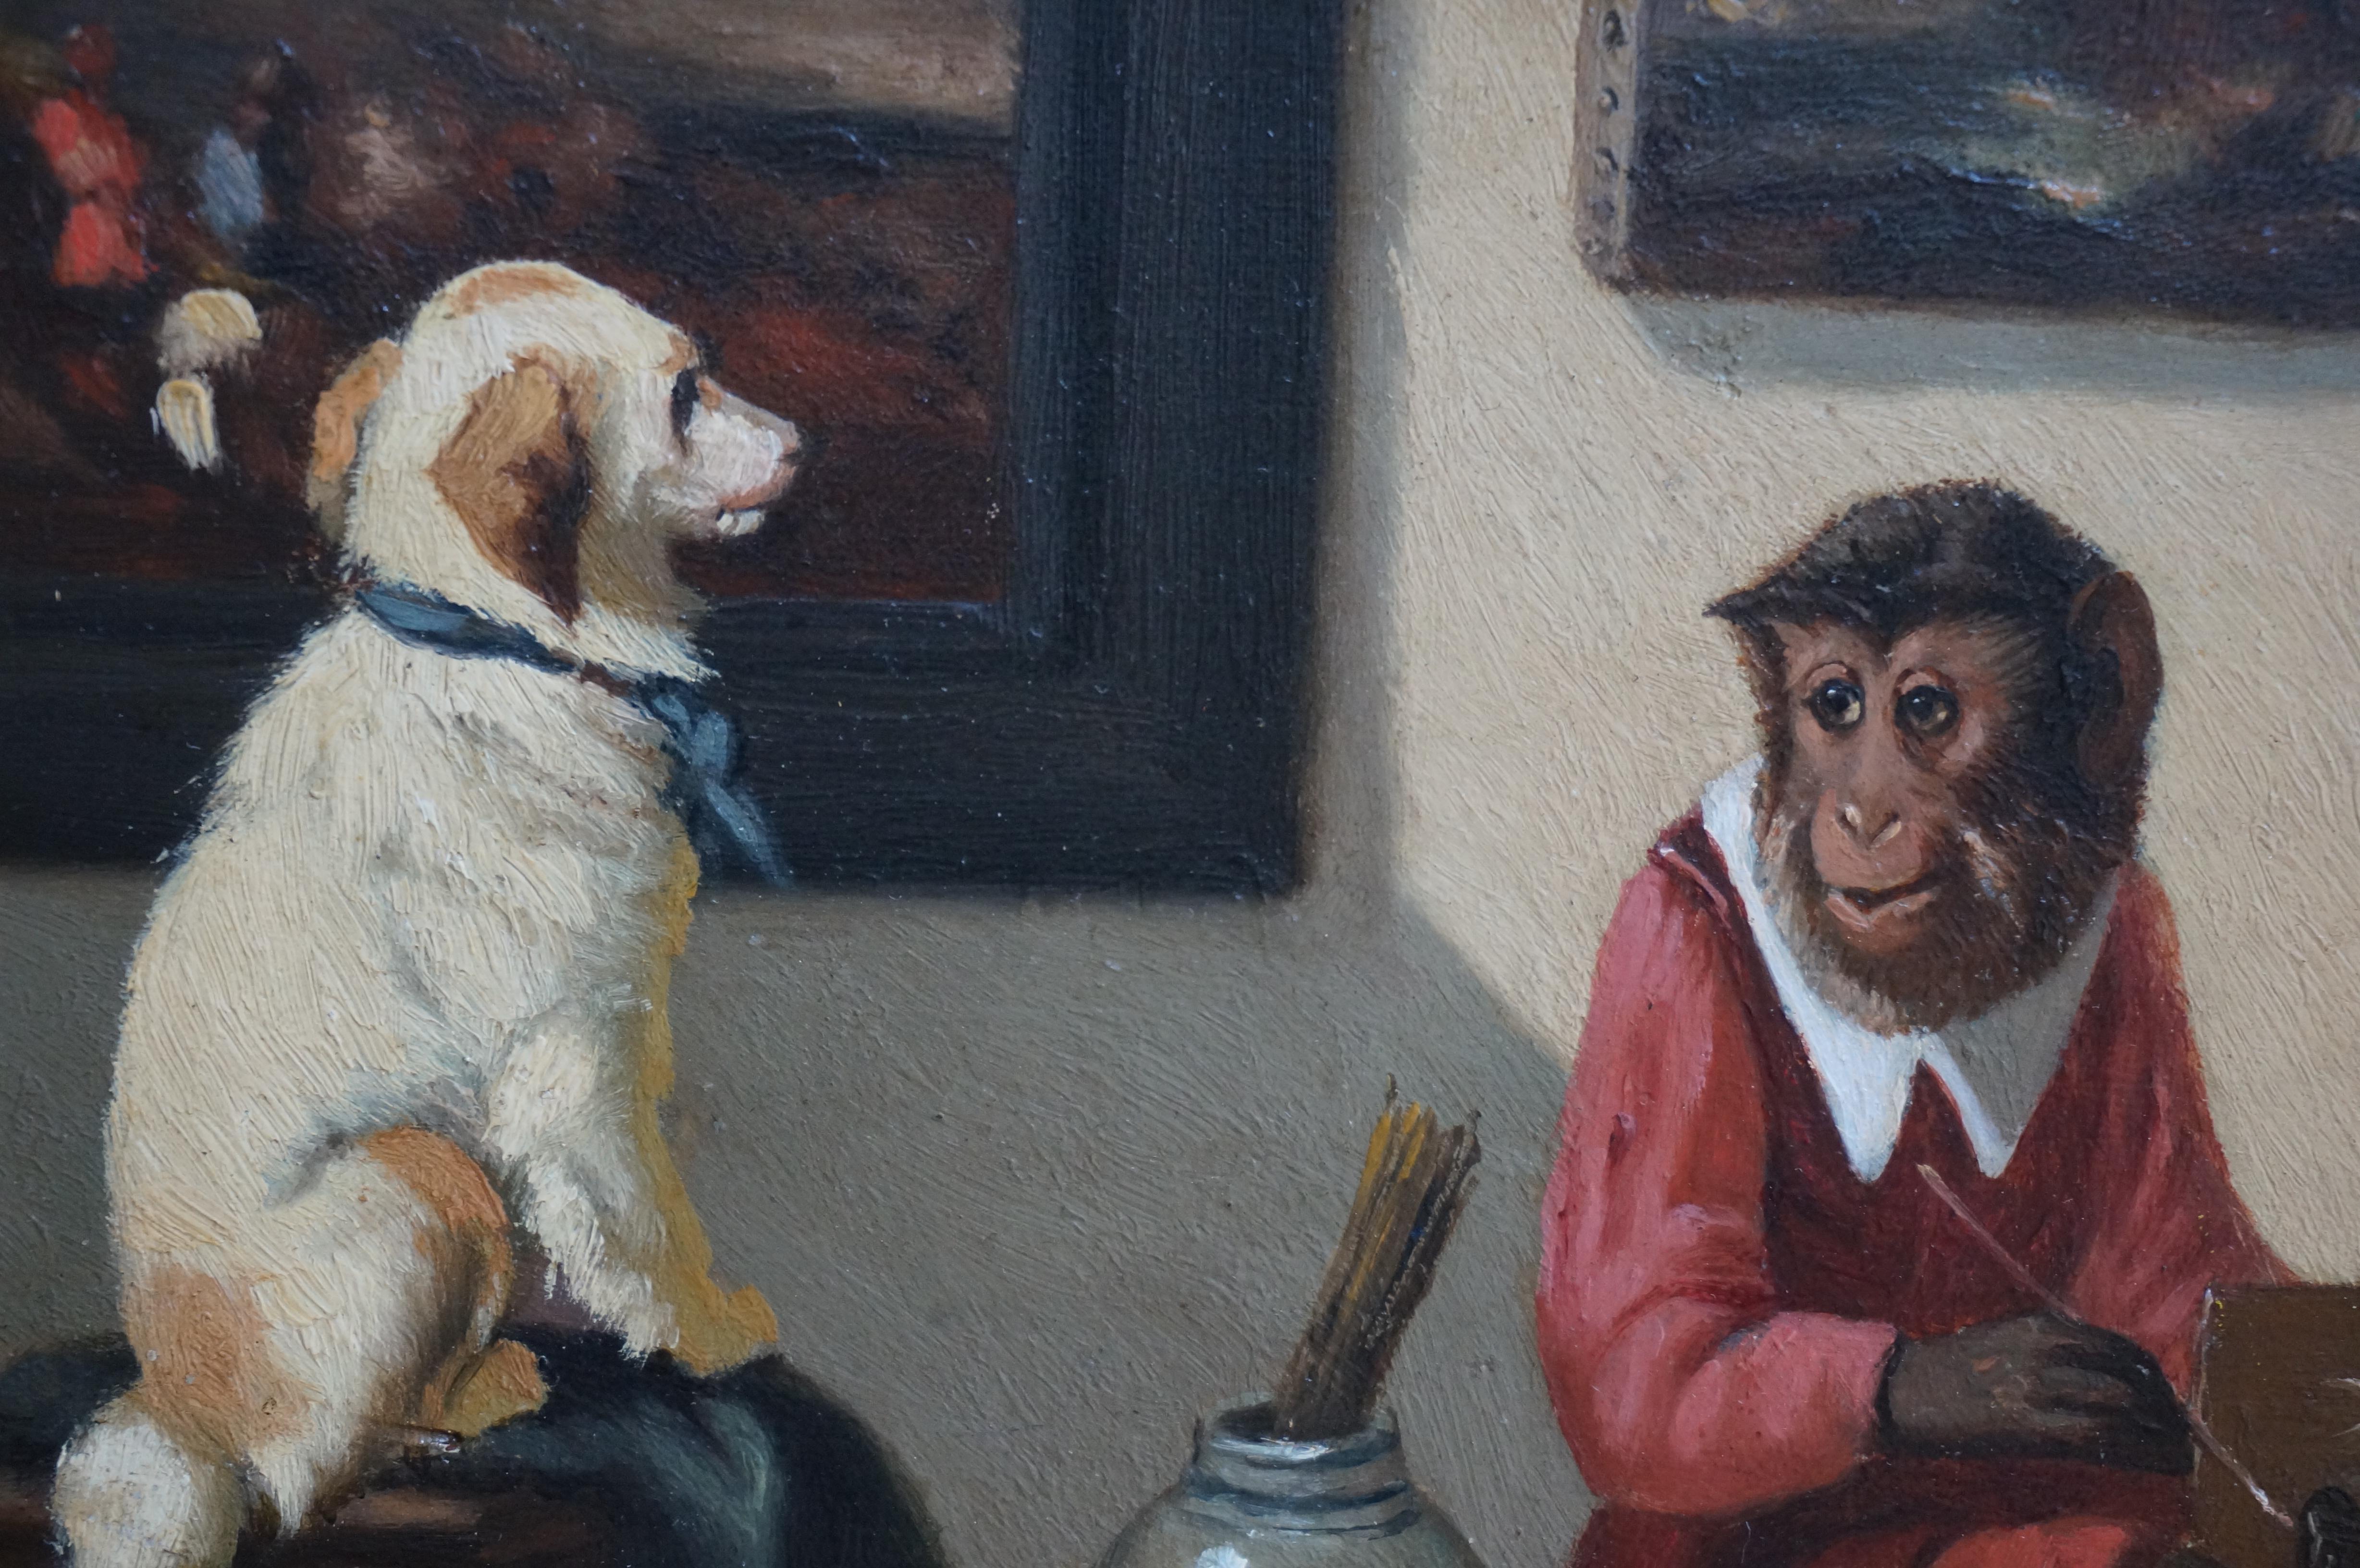  Singerie, Monkey painting a dog, ca. 1900, oil painting, painted with foot 2